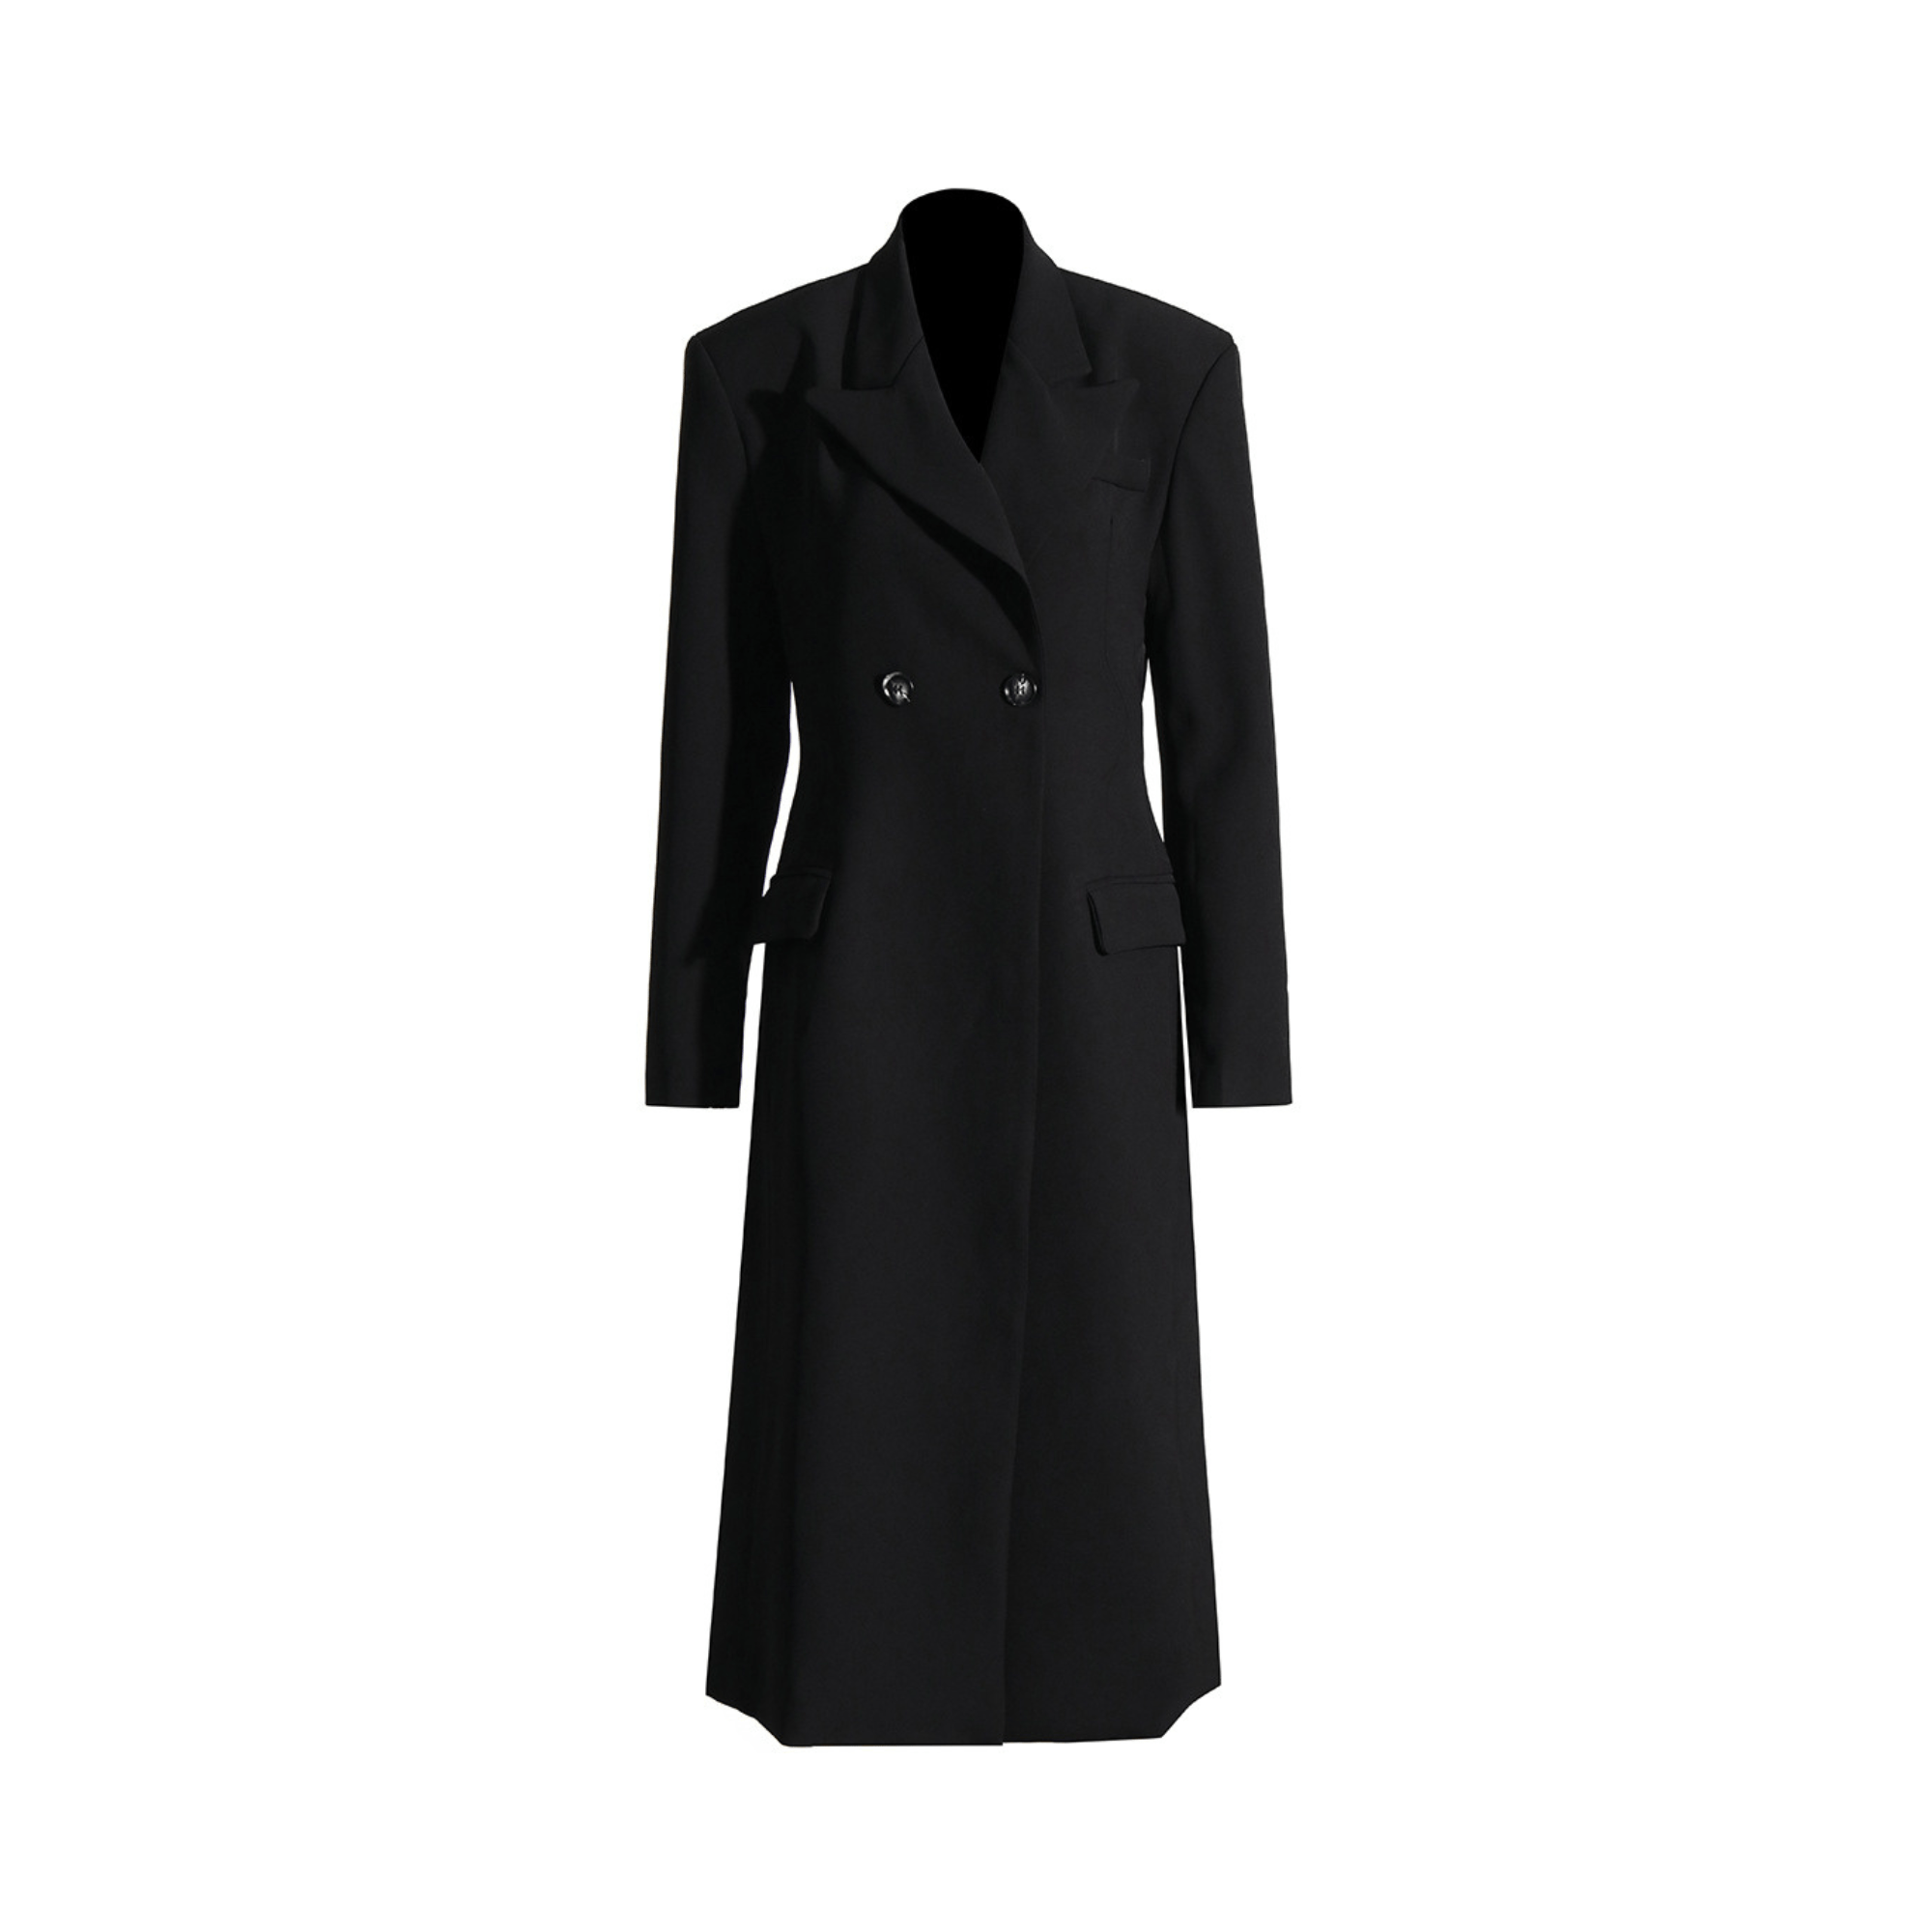 Double Buttons Loose Fit Coat - Kelly Obi New York